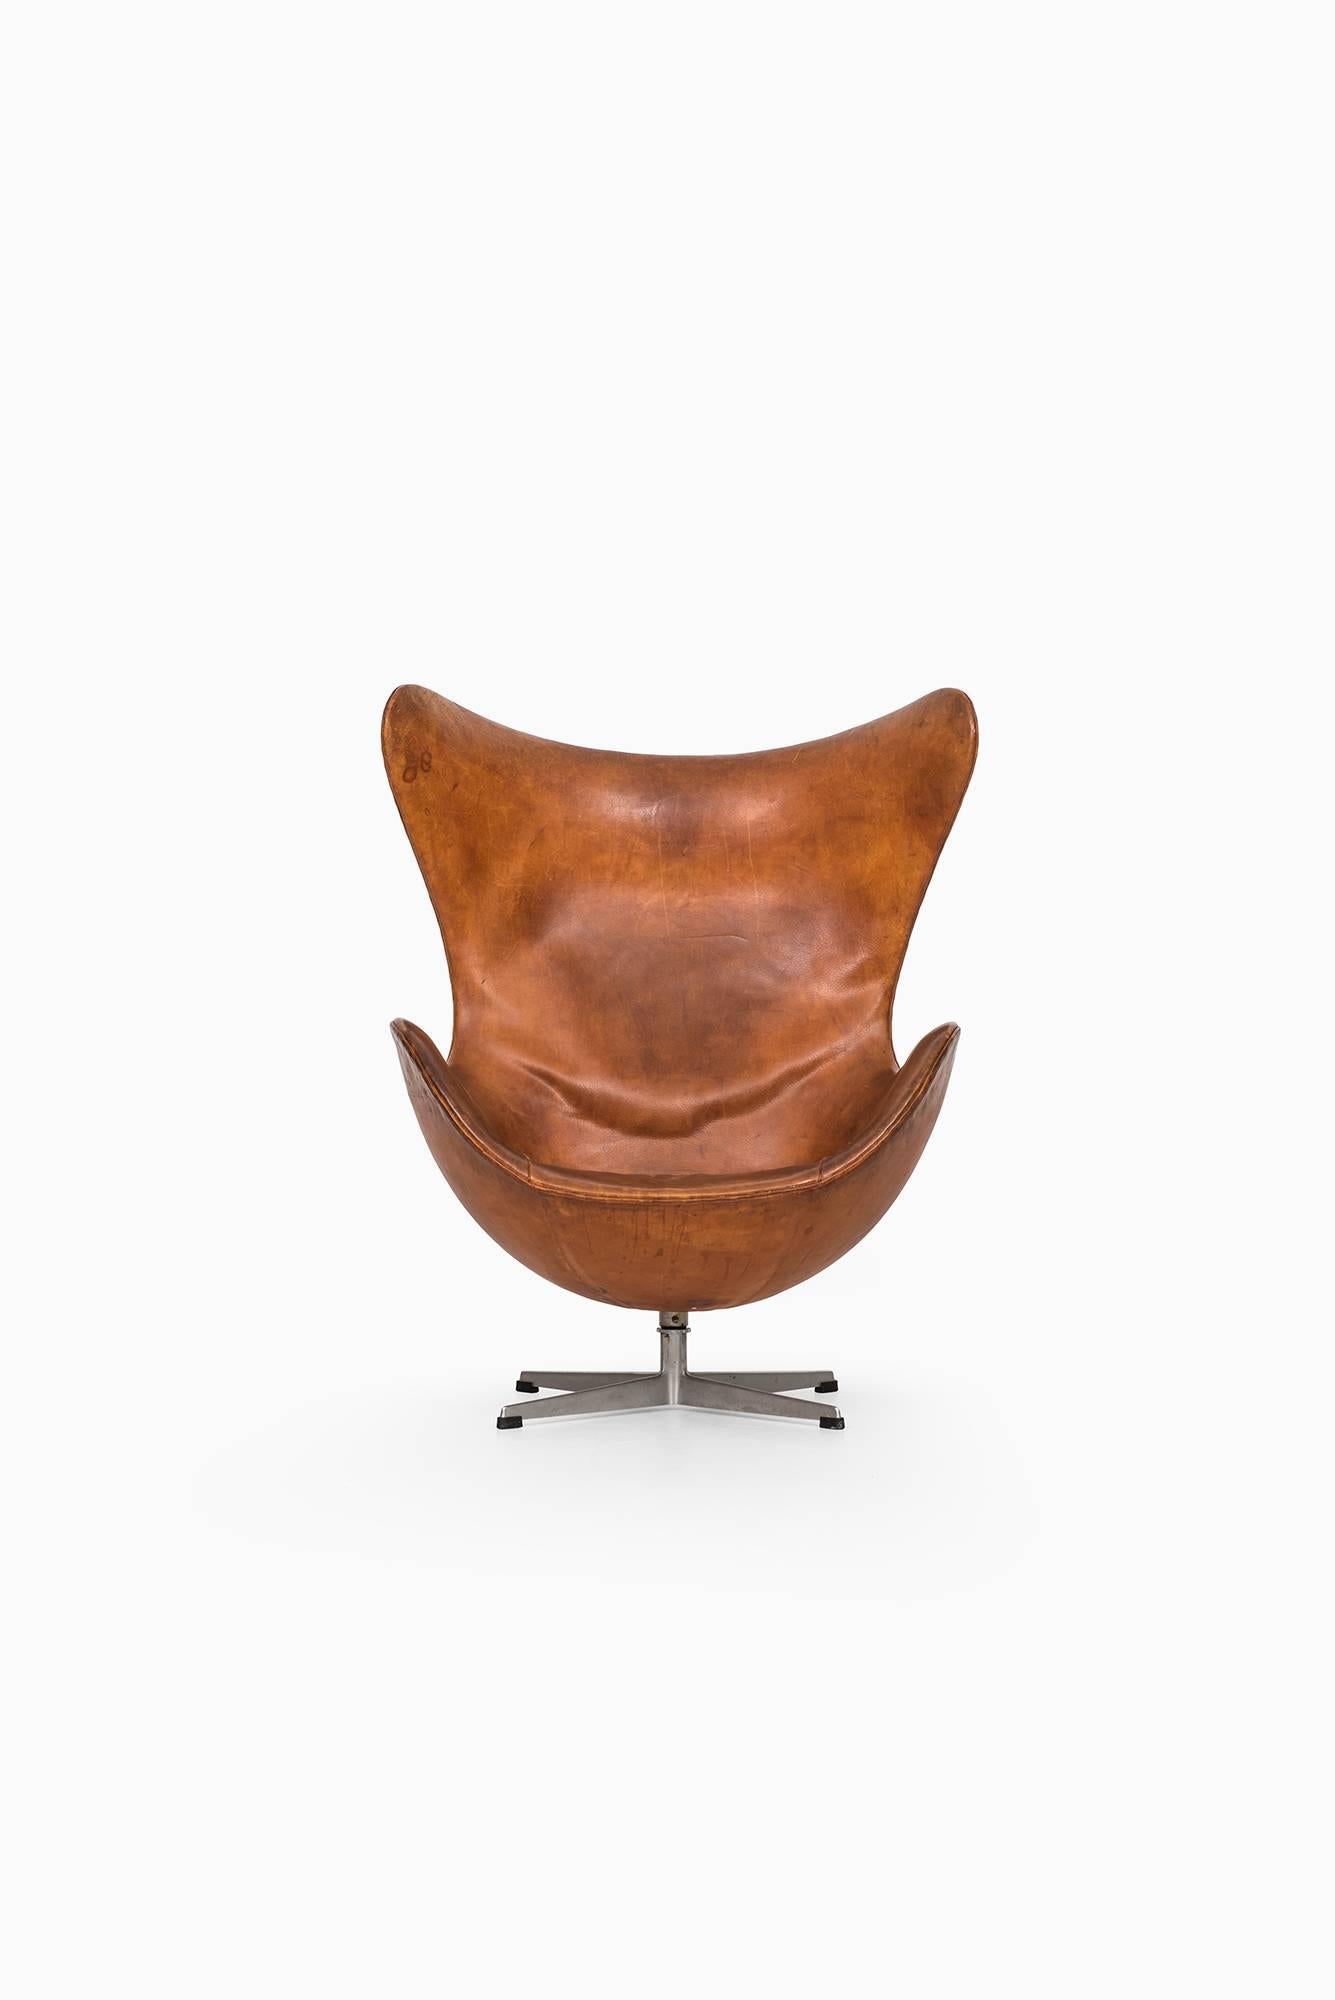 Rare and early easy chair model 3316/egg designed by Arne Jacobsen. Produced by Fritz Hansen in Denmark.